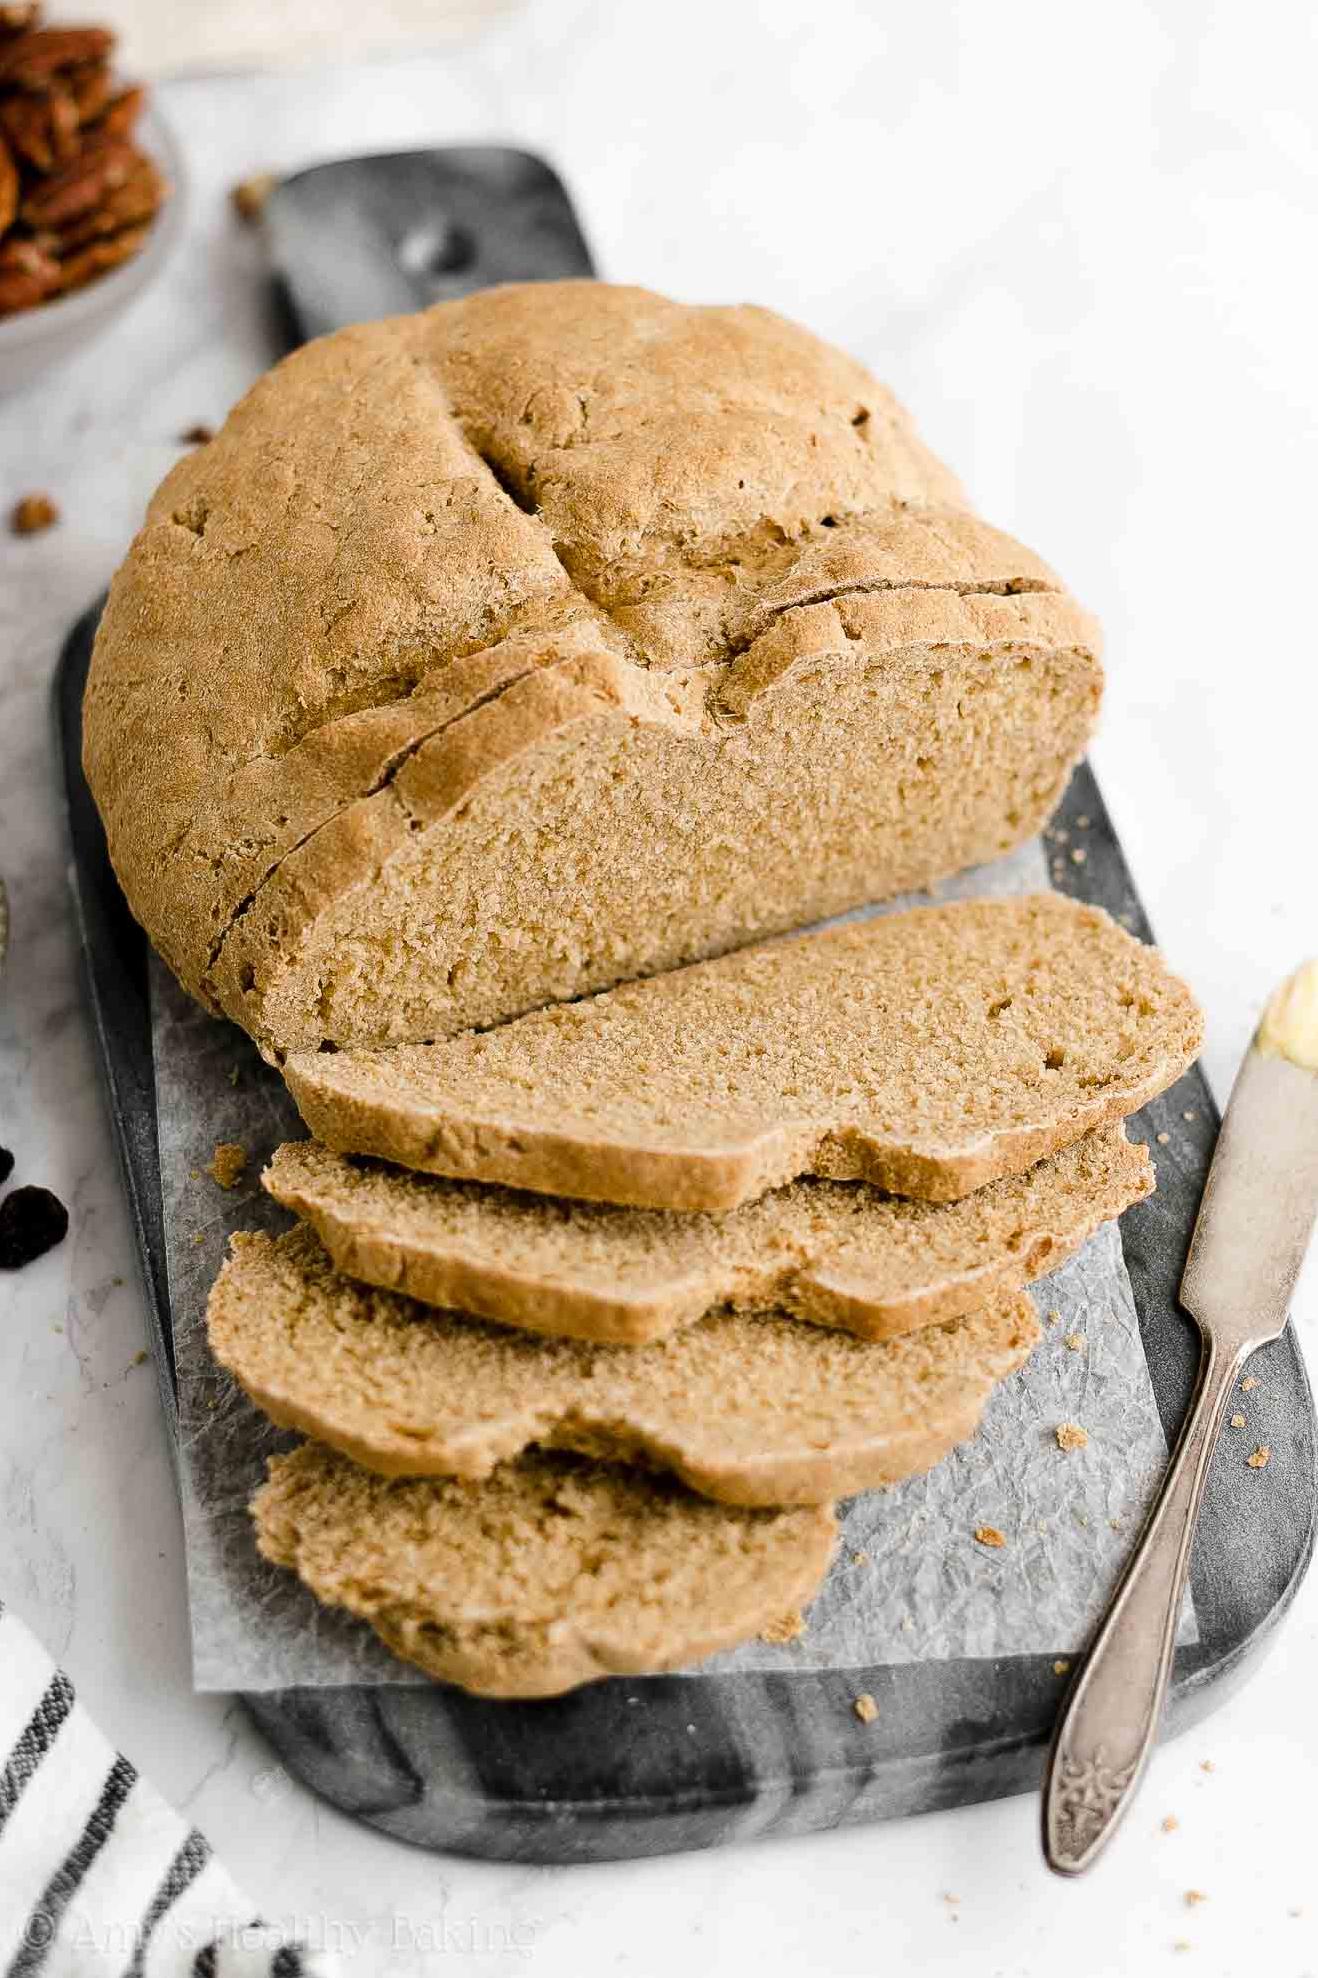  This loaf is a real hidden gem for health nuts!